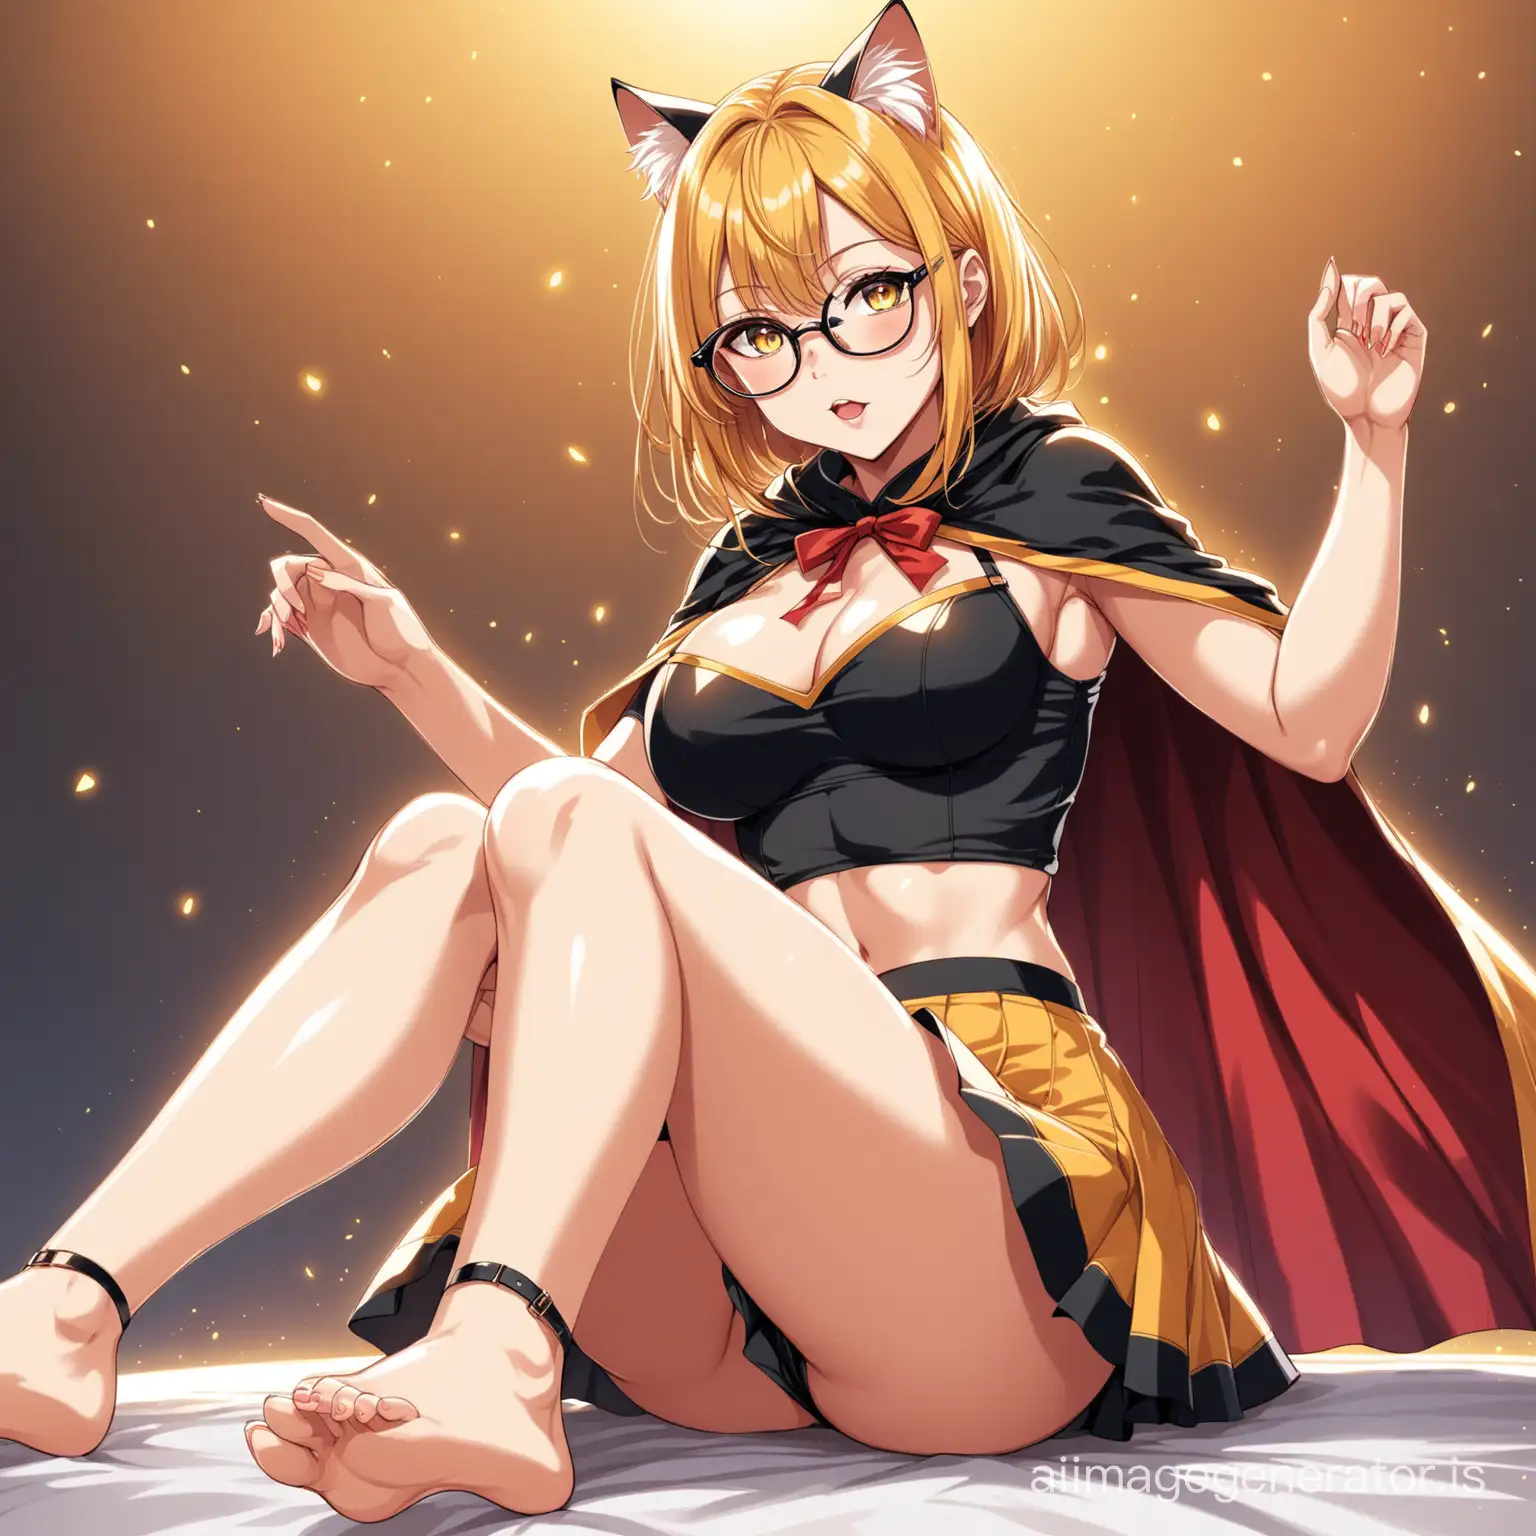 hot anime girl in a sexy croptop and skirt wearing a cape reaching her feet and a pair of cat eye spectacles